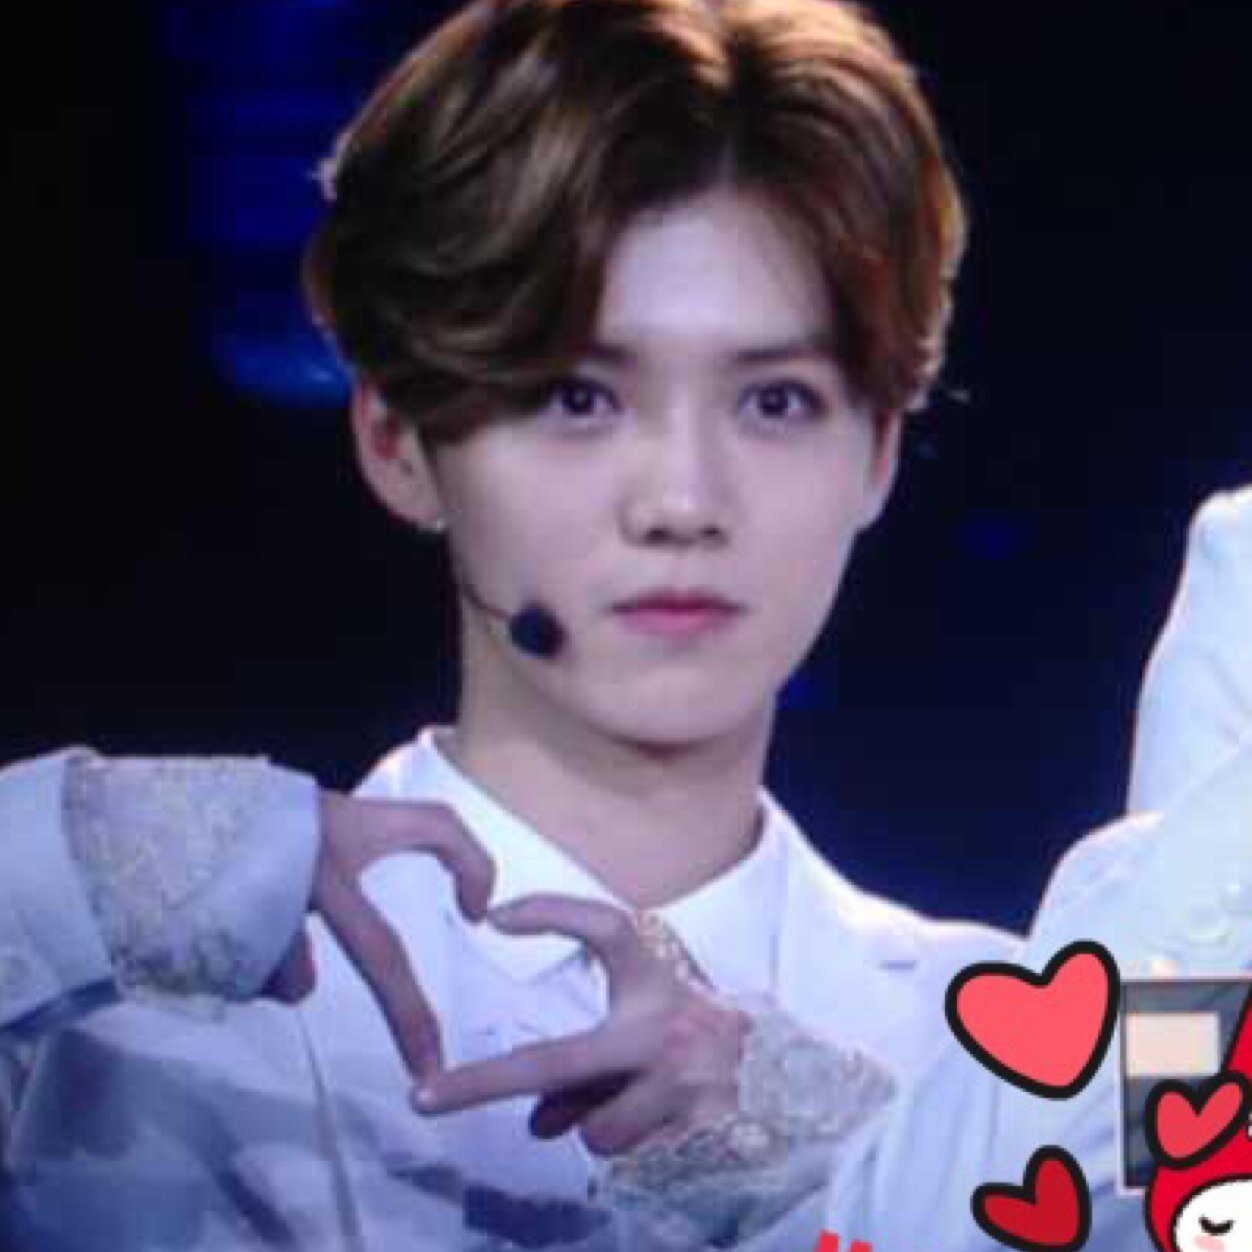 I am a chinese exo fan in seoul ^^ I like luhan.My blog http://t.co/UdANR6513p